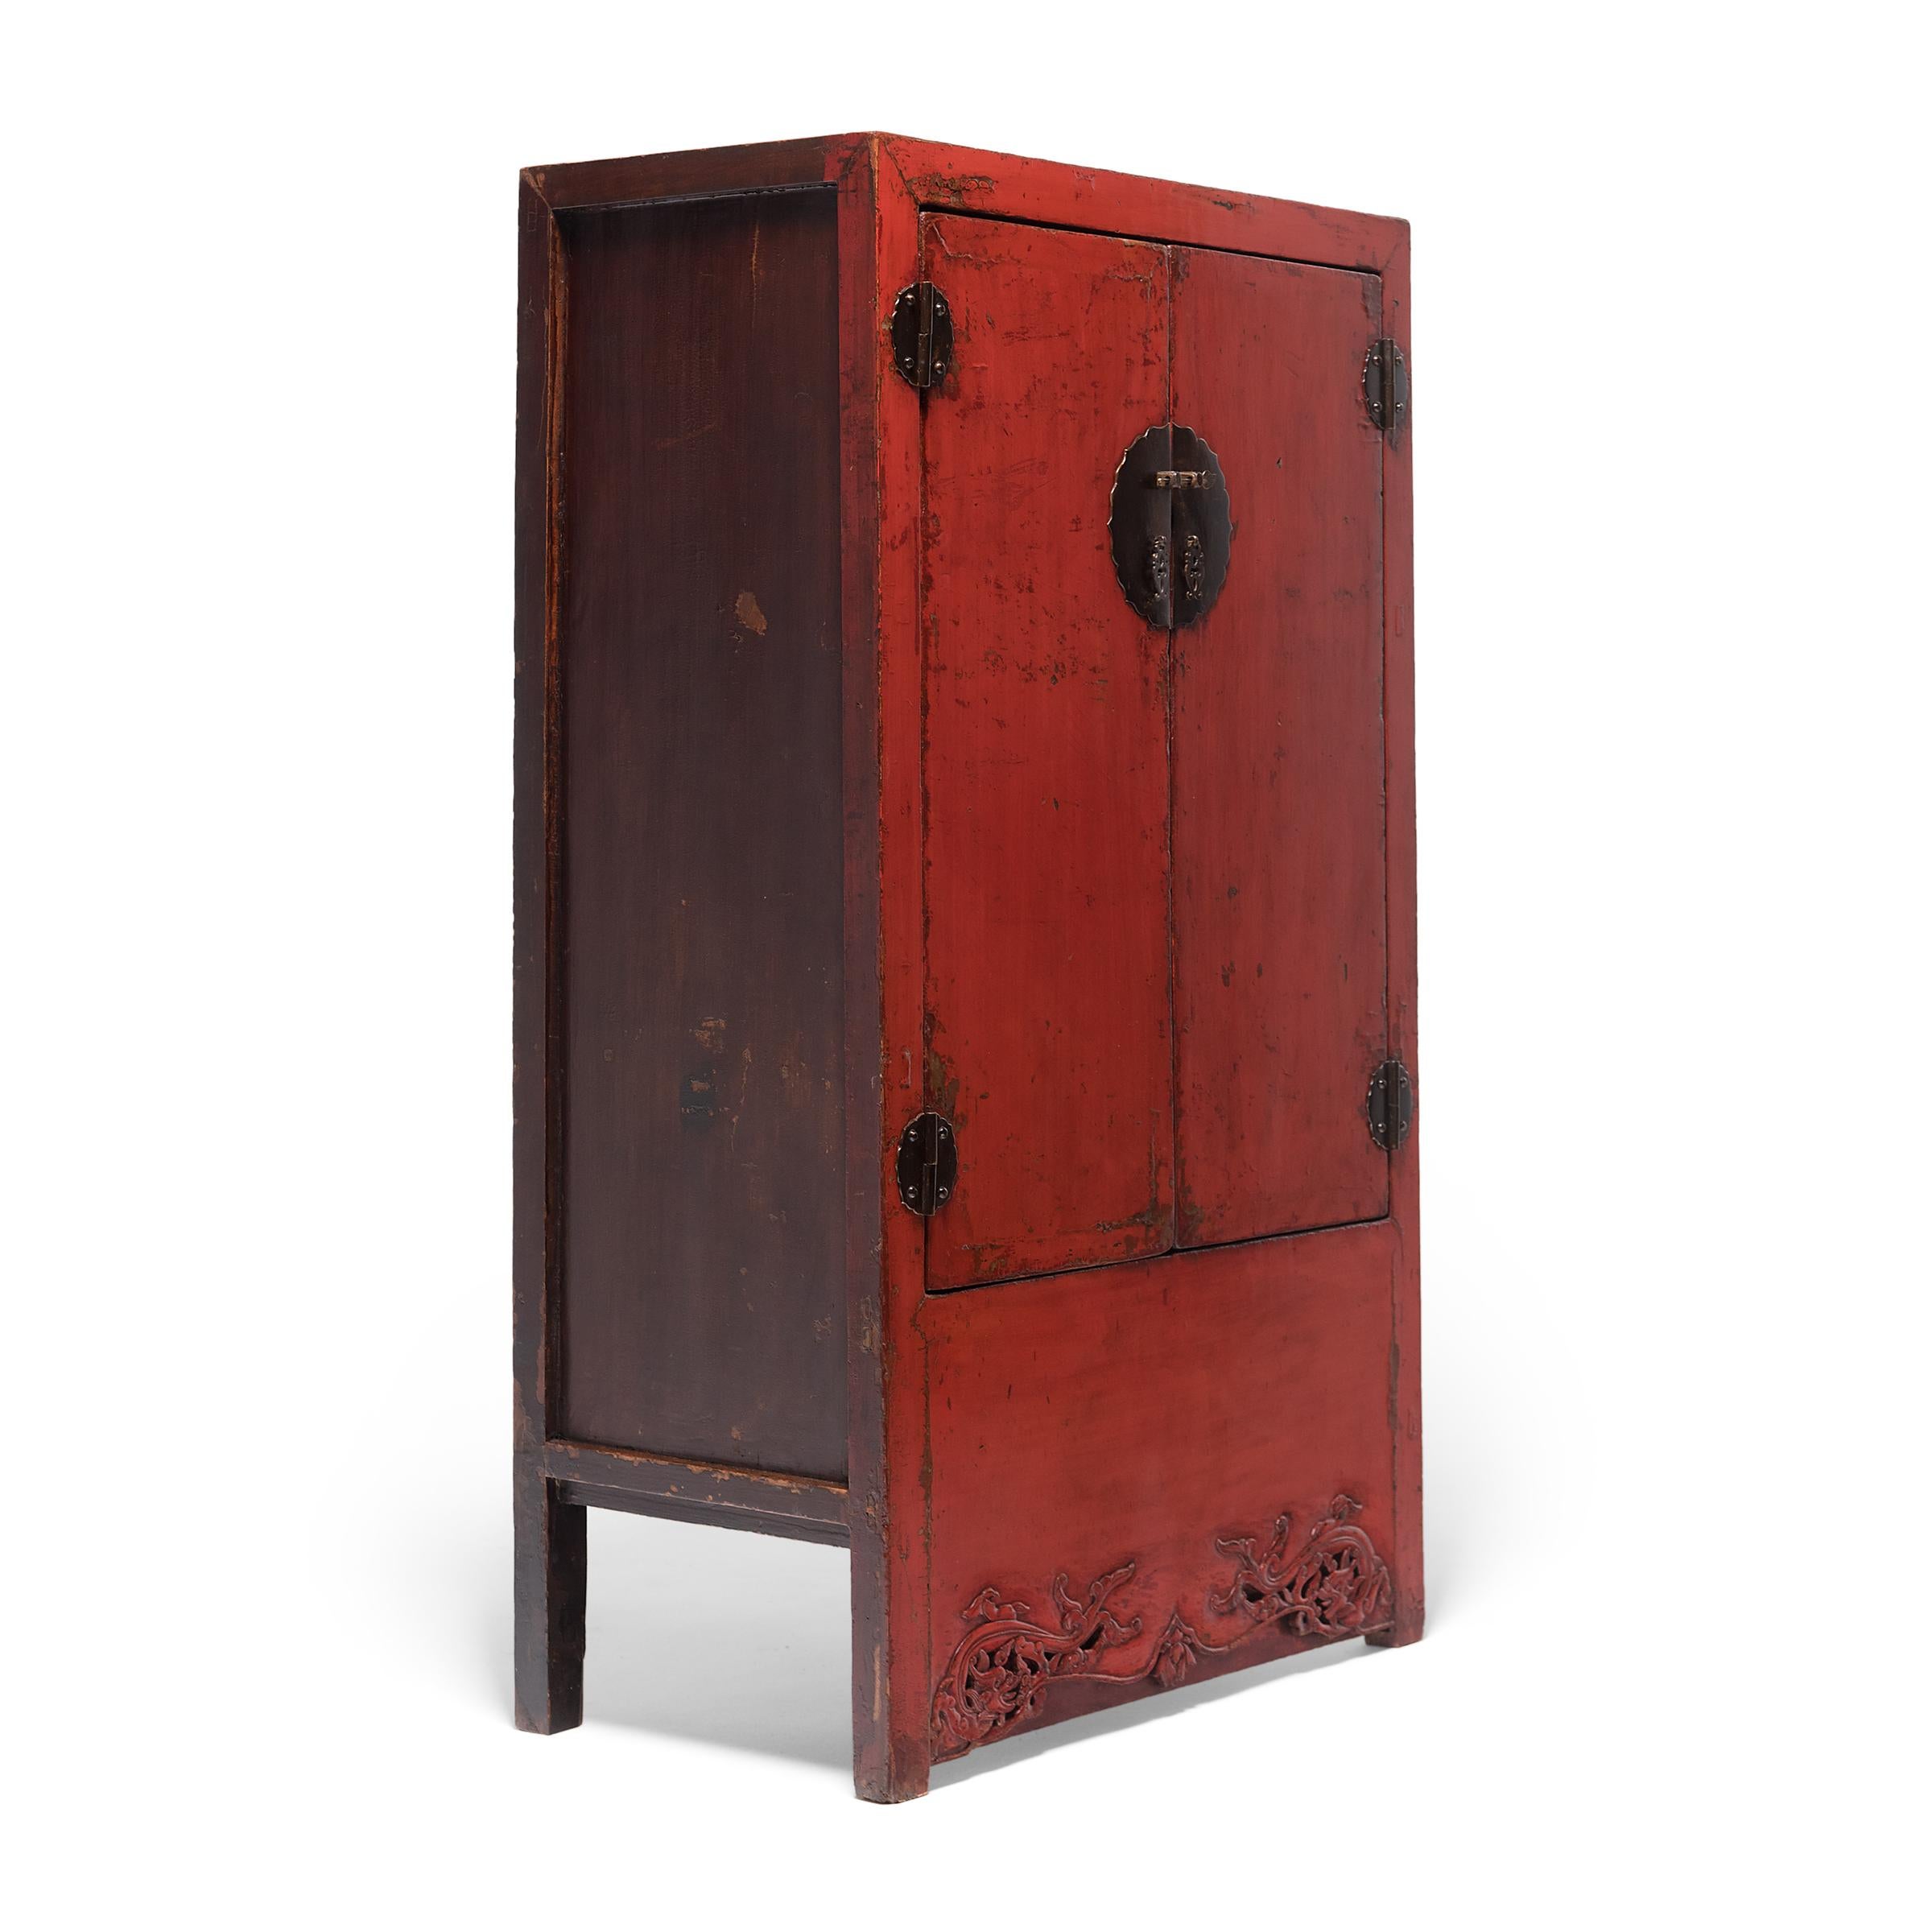 Lacquered Chinese Red Lacquer Cabinet, c. 1850